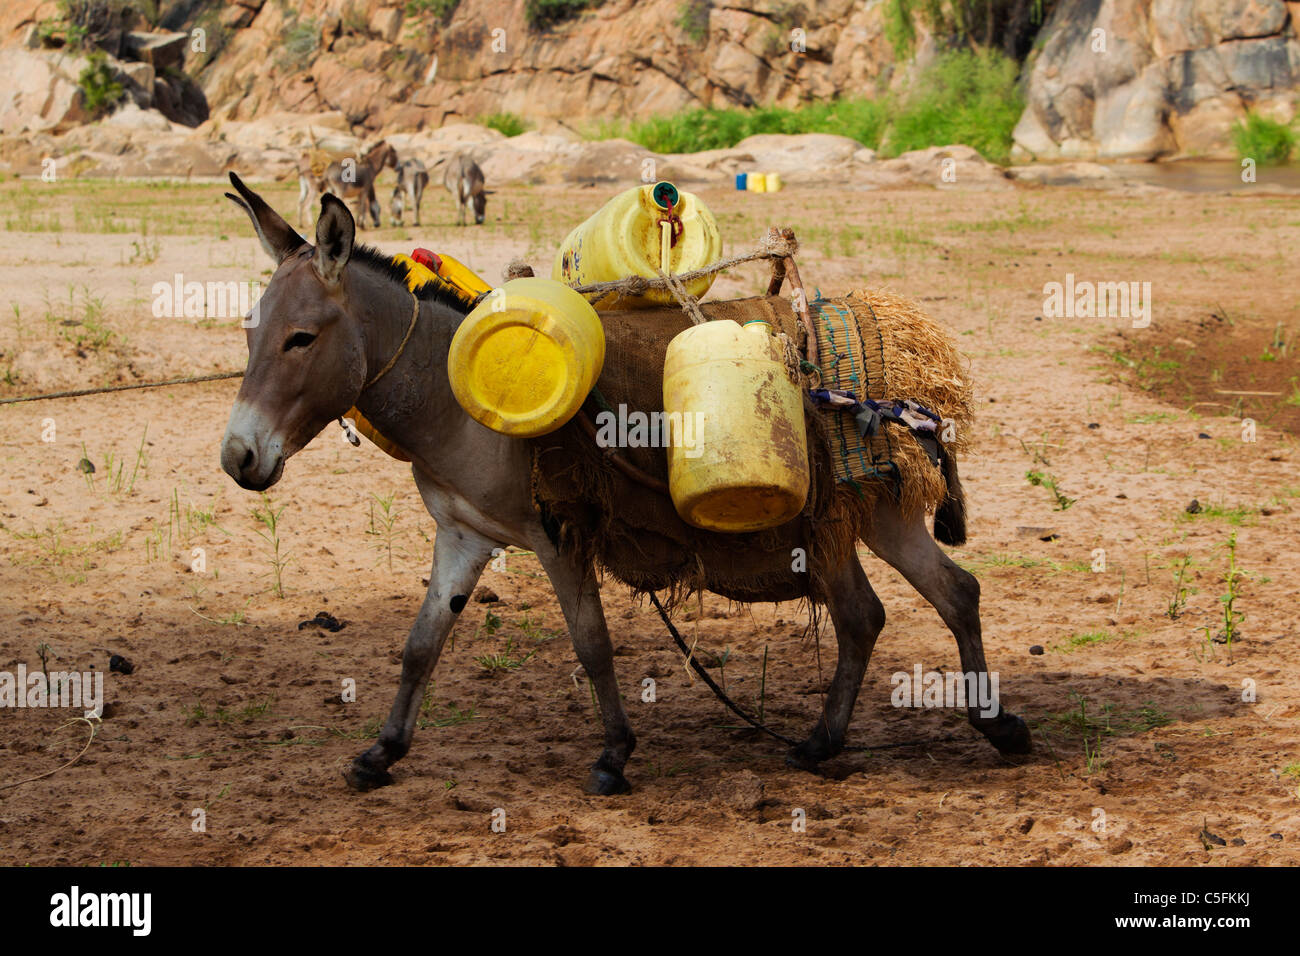 Donkey with water drums on the banks of the Uaso Nyiro River in Kenya Stock Photo